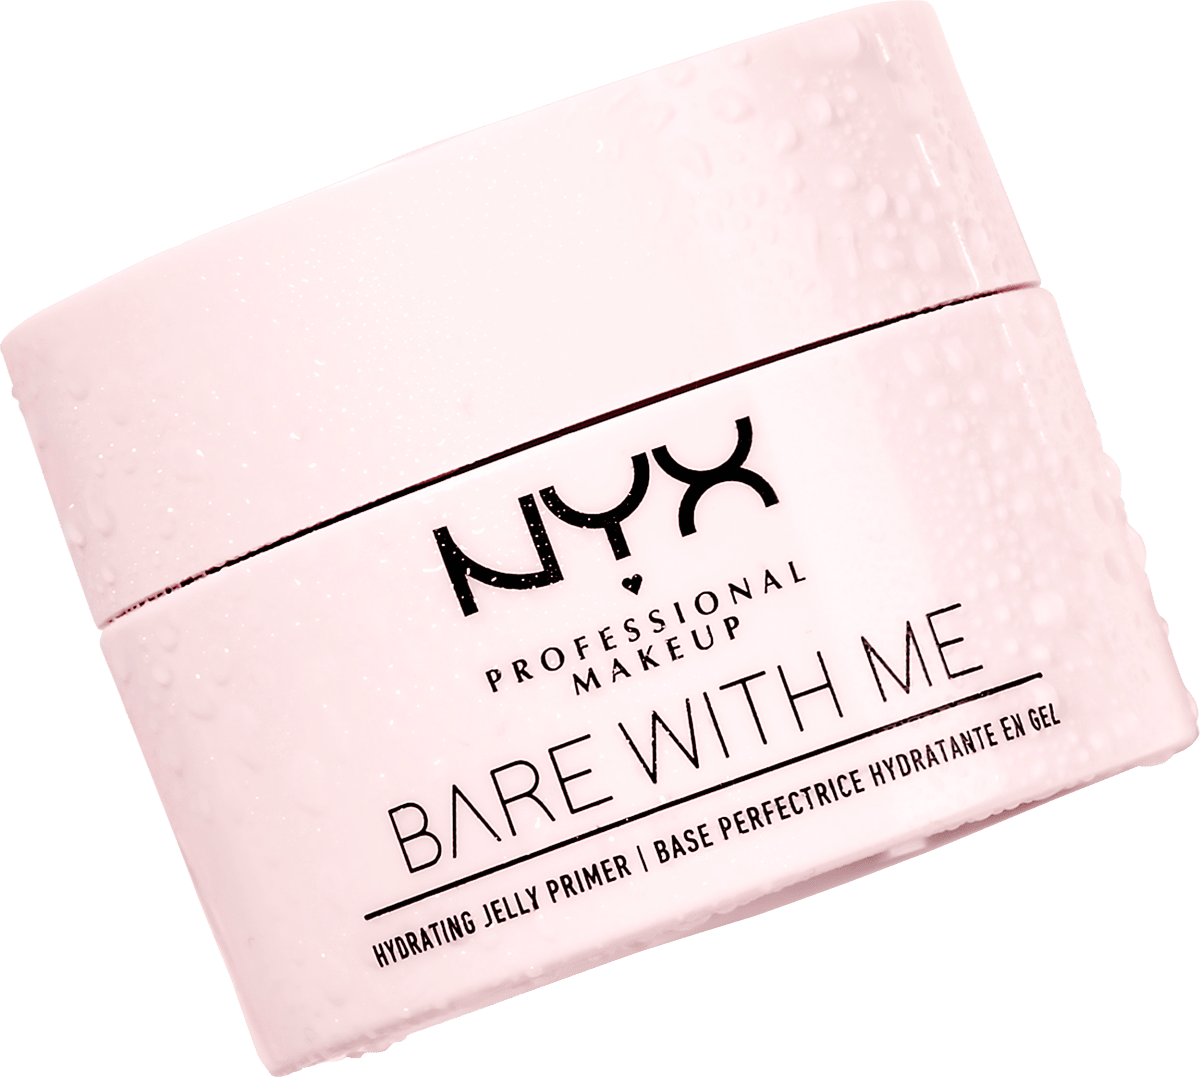 NYX Professional Makeup • Bare With Me Hydrating Jelly Primer •